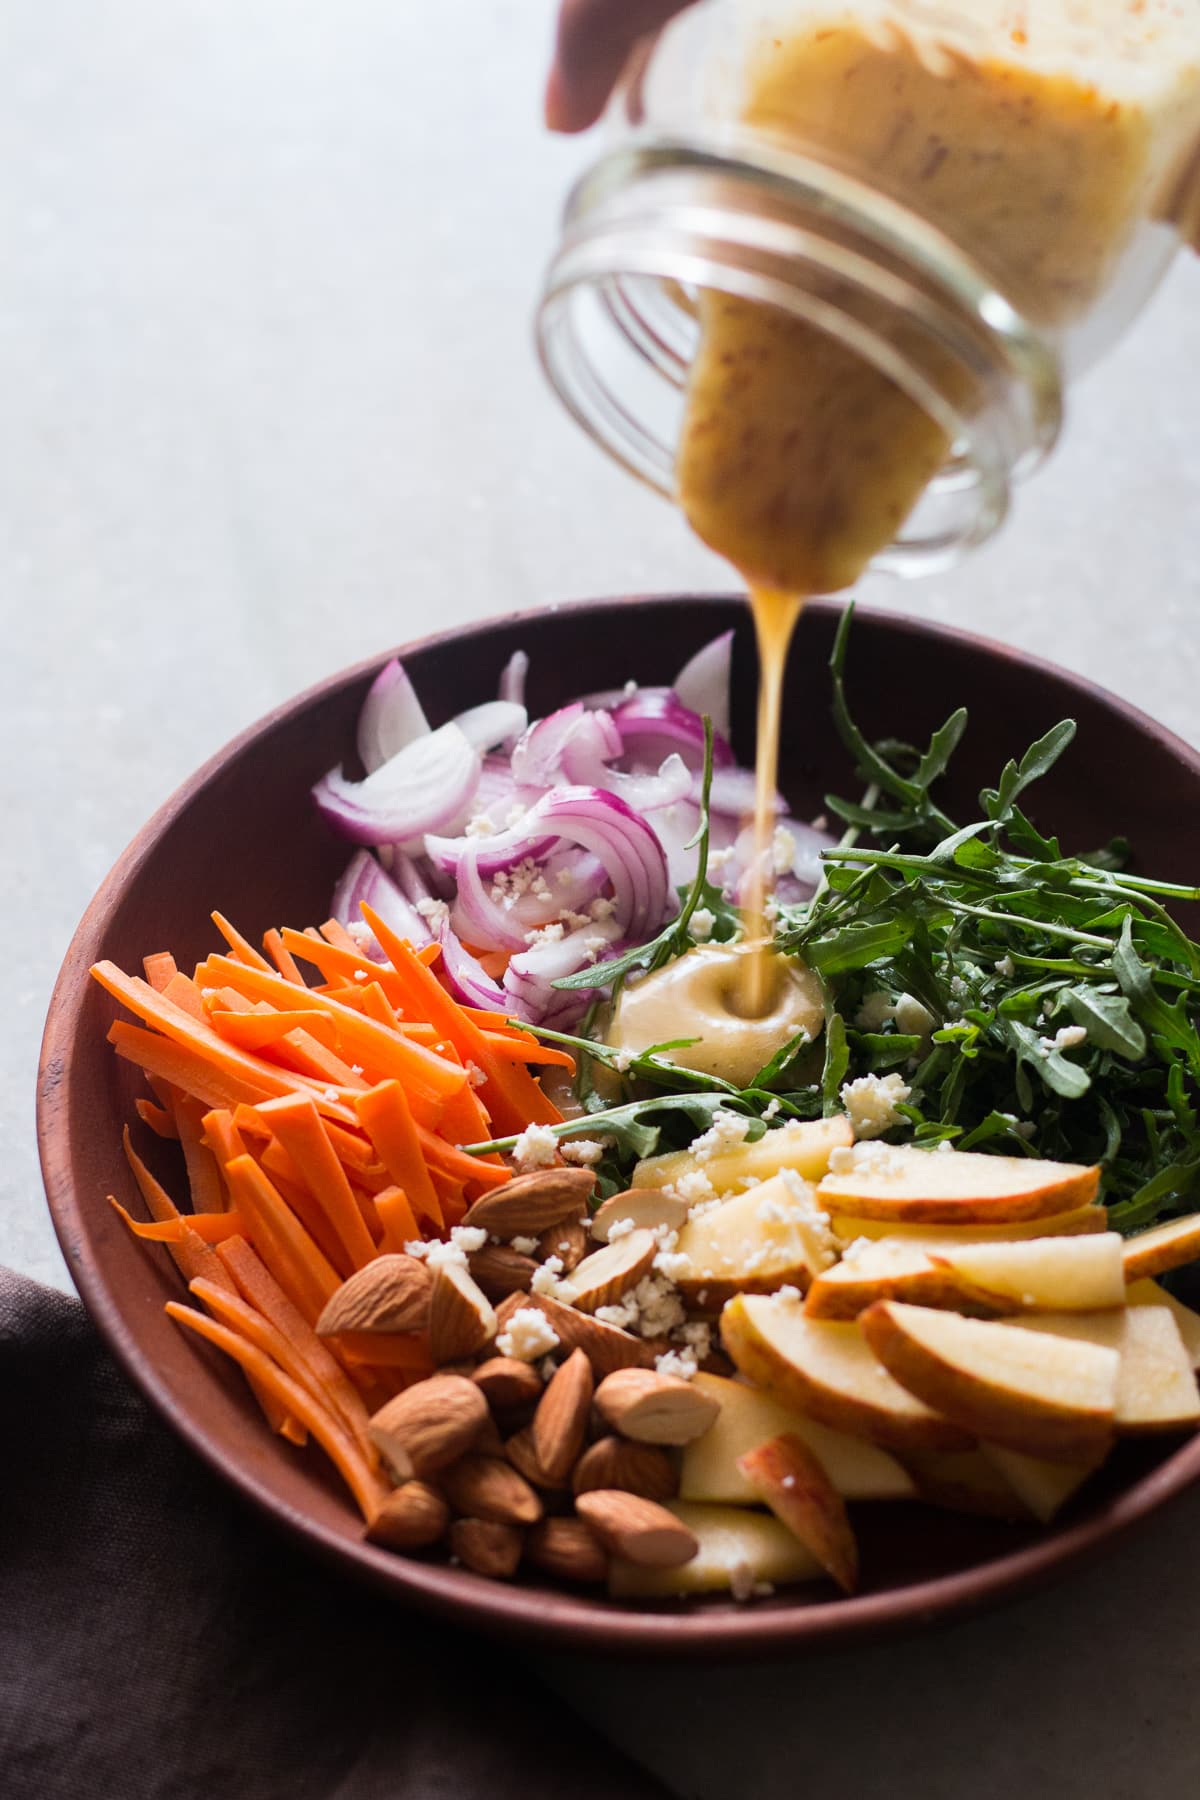 wooden bowl with apple slices, almonds, carrots, arugula, onion, and goat cheese in it, creamy dressing is being poured over it